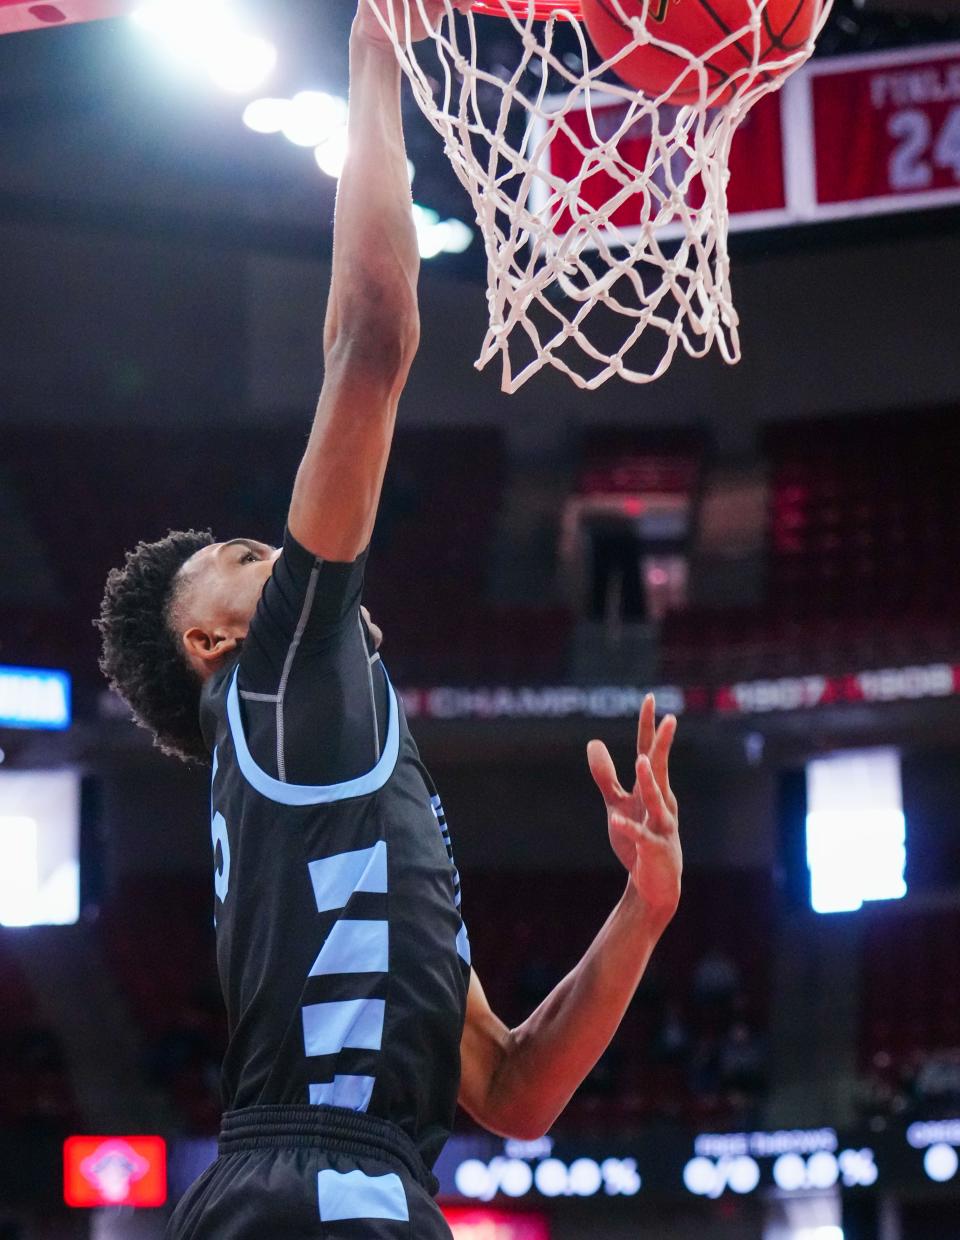 Nicolet's Davion Hannah (25) dunks during the WIAA Division 2 state boys basketball semifinal against Pewaukee at the Kohl Center in Madison on Friday, March 17, 2023.